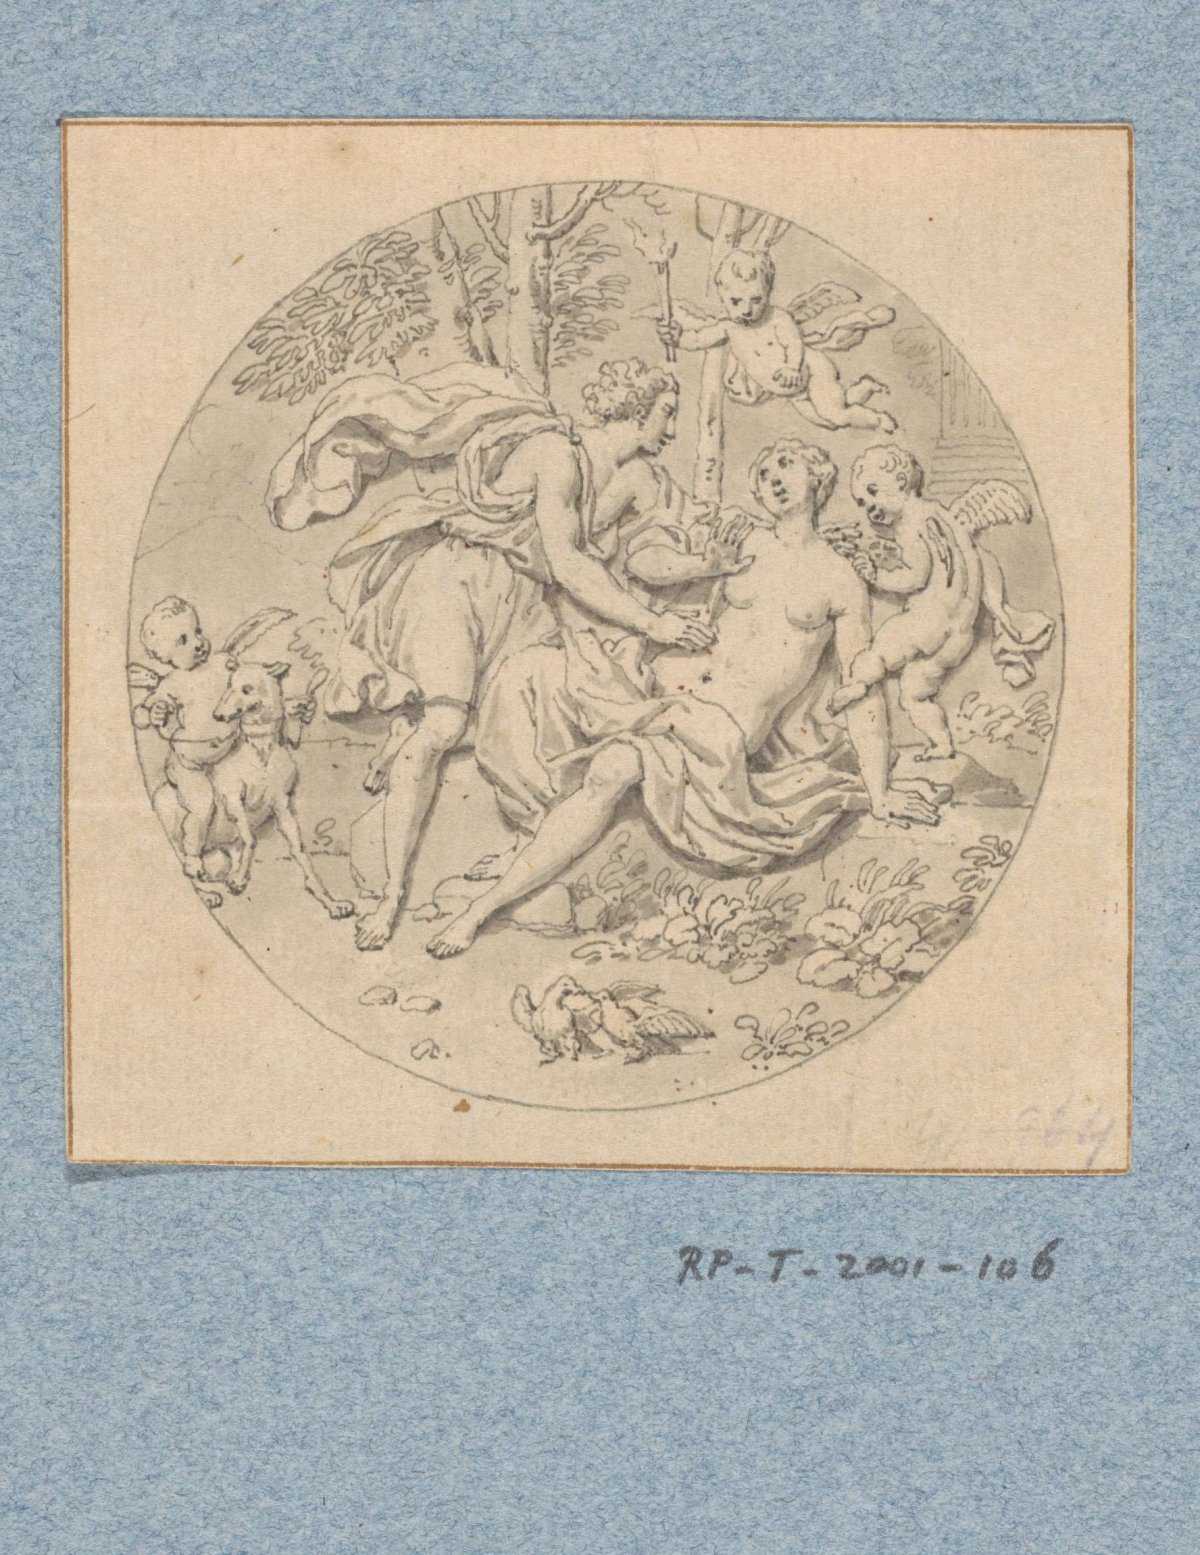 Design for the decoration of a watch case with Venus and Adonis, Louis Fabritius Dubourg, c. 1700 - 1732